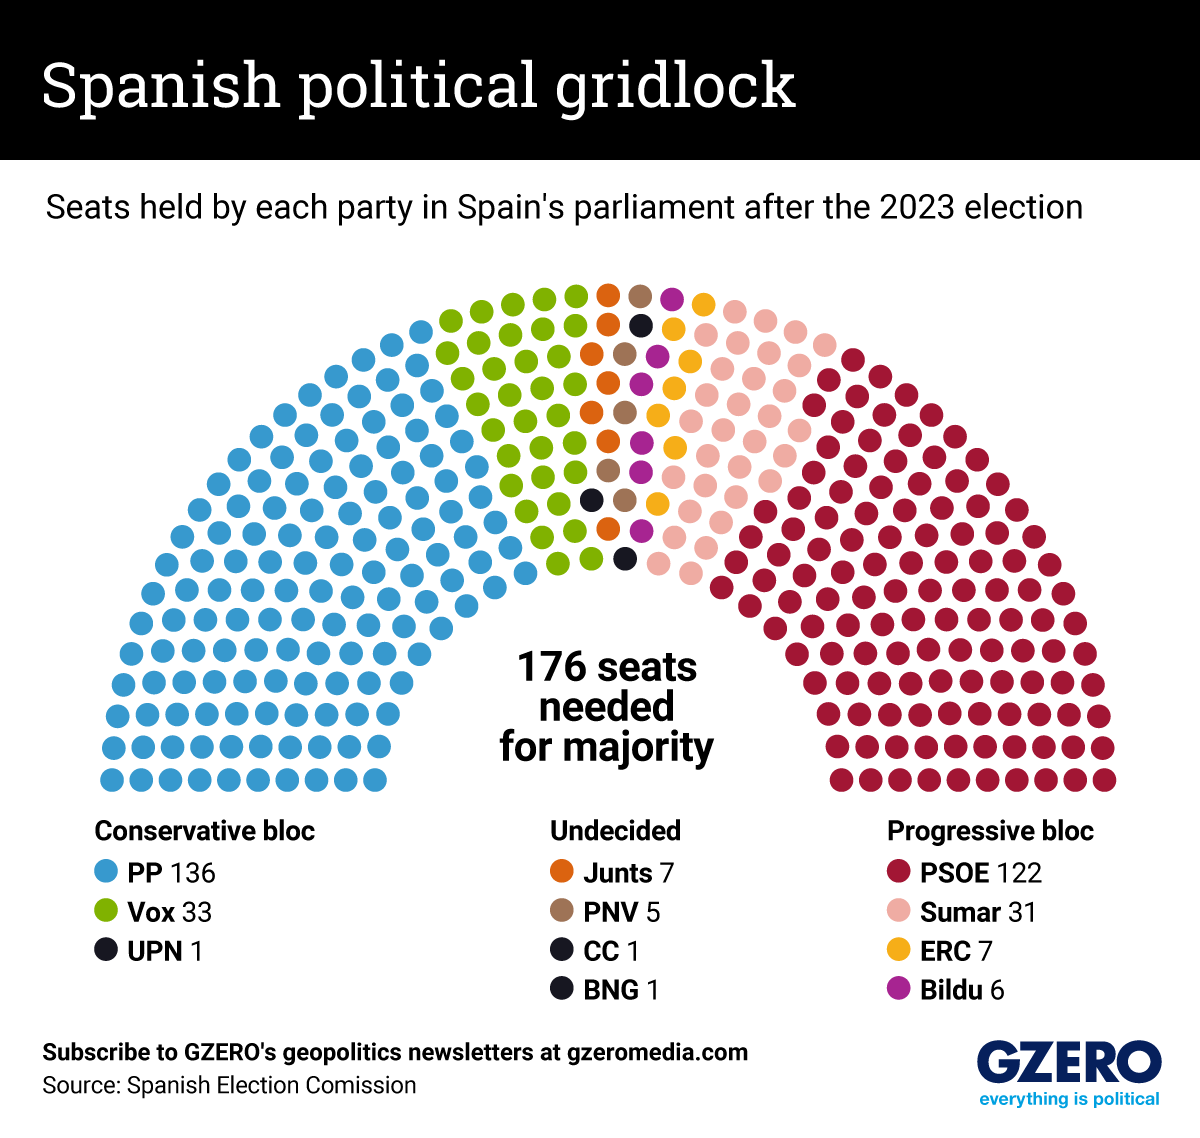 Mock chamber chart showing seats held by each party in the Spanish parliament